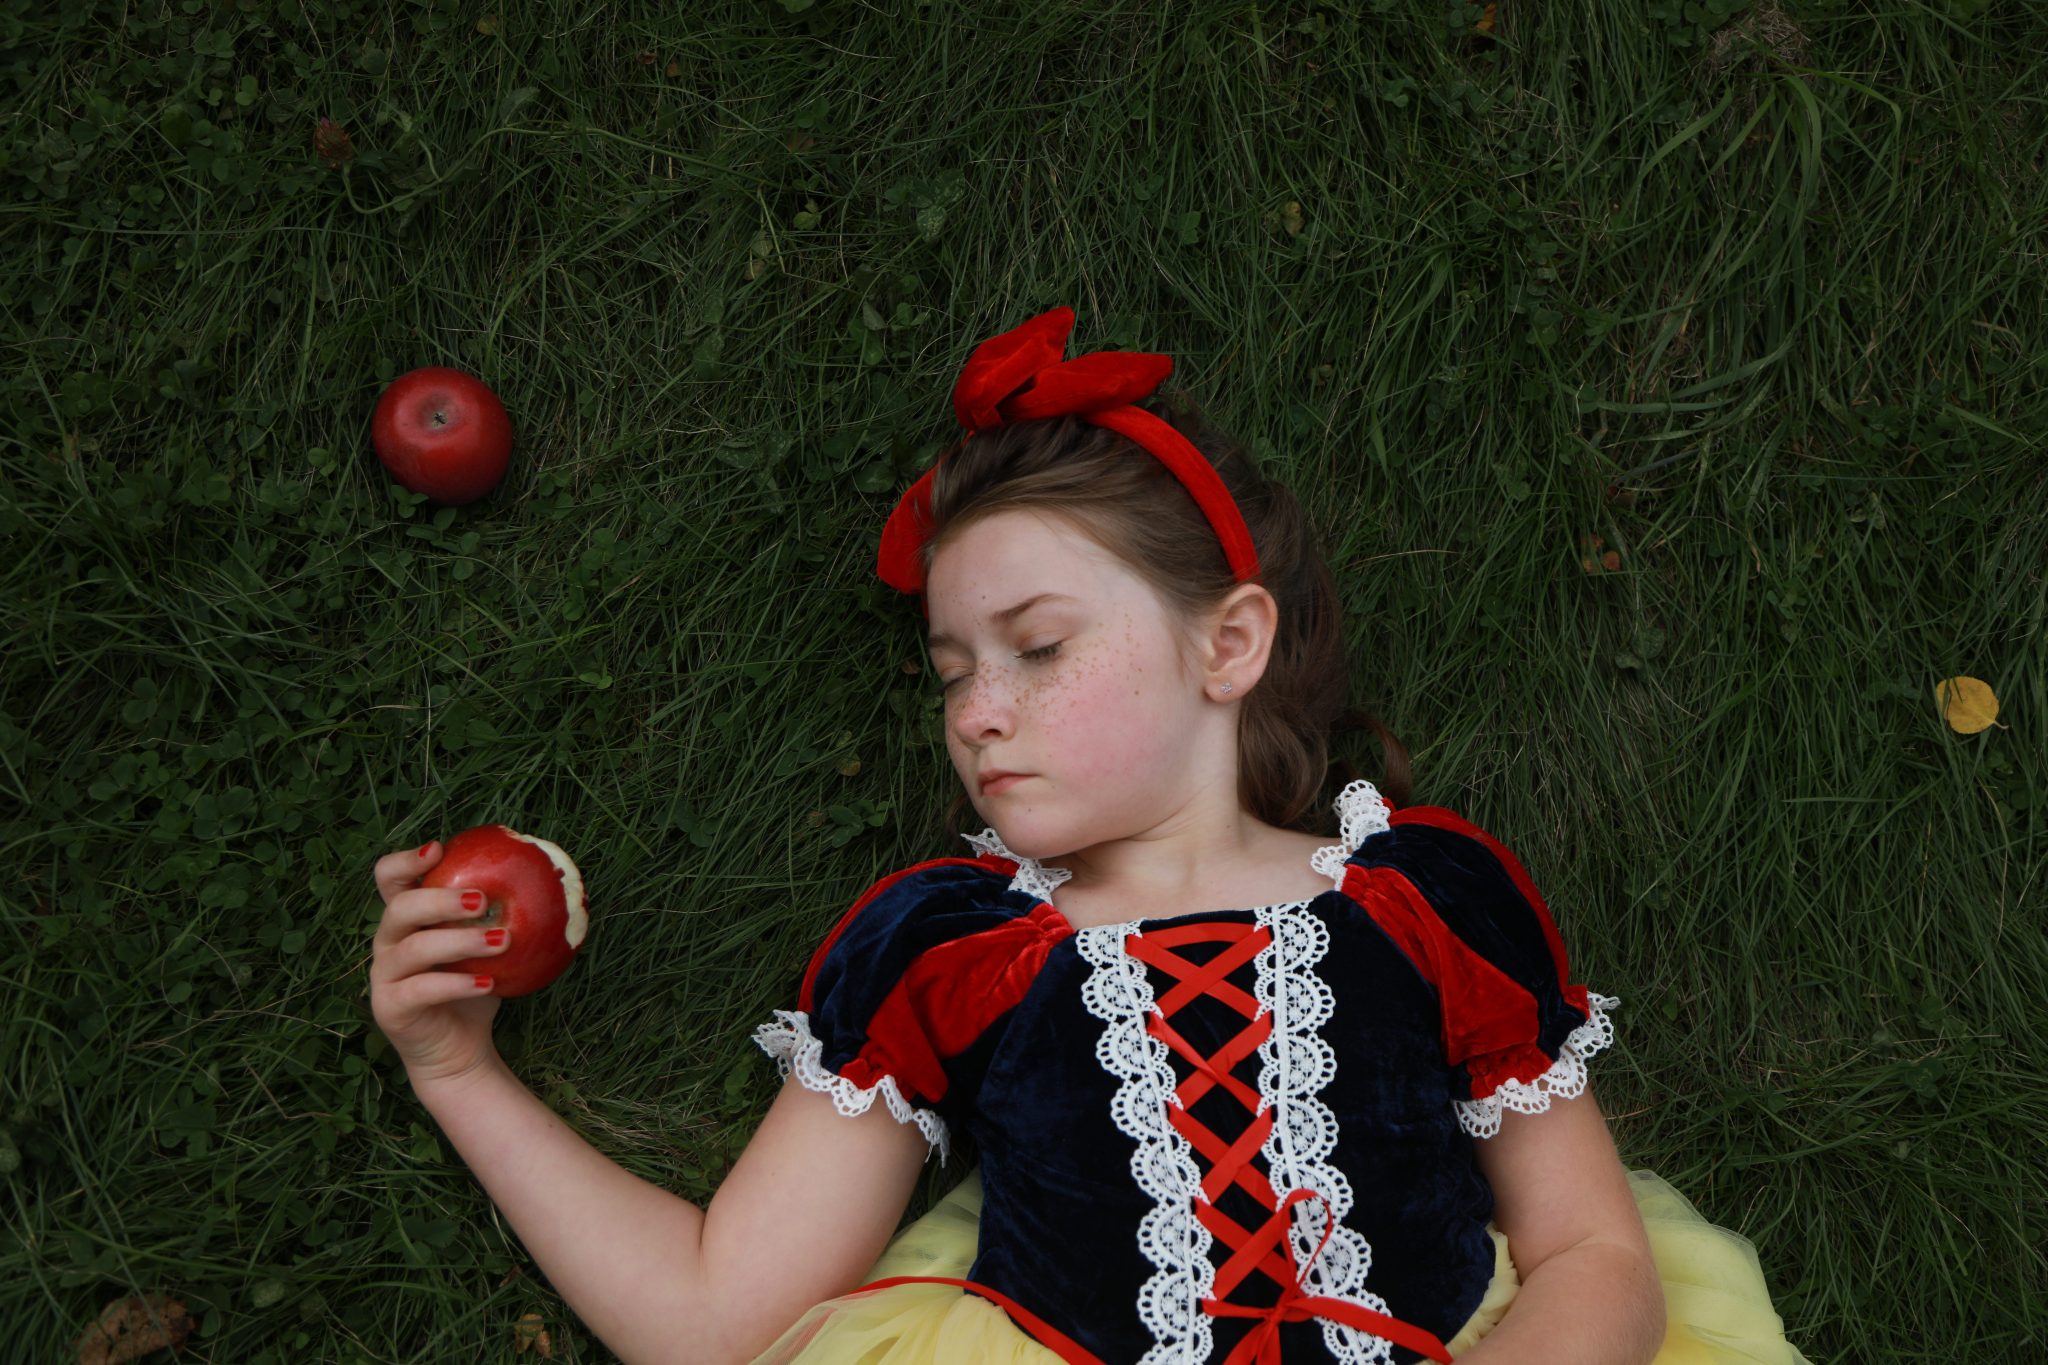 little girl laying on grass dressed up as snow white, holding a bitten apple with her eyes closed.